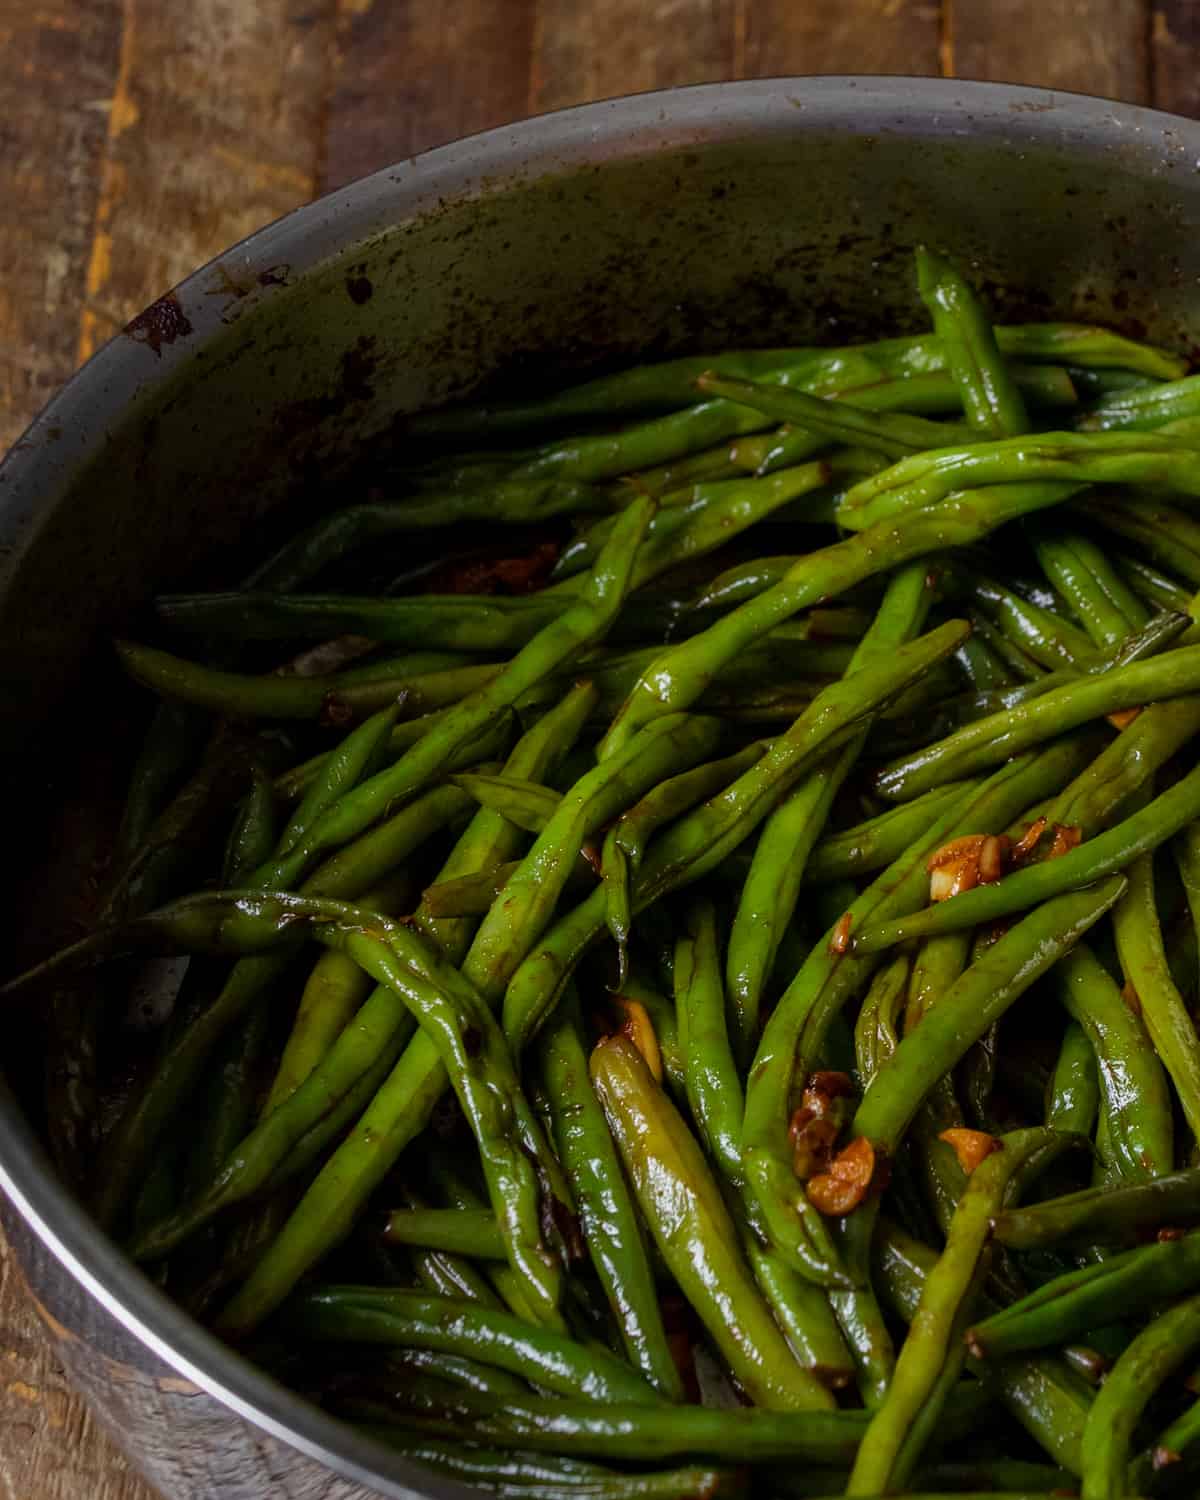 Cooked green beans with sriracha sauce.